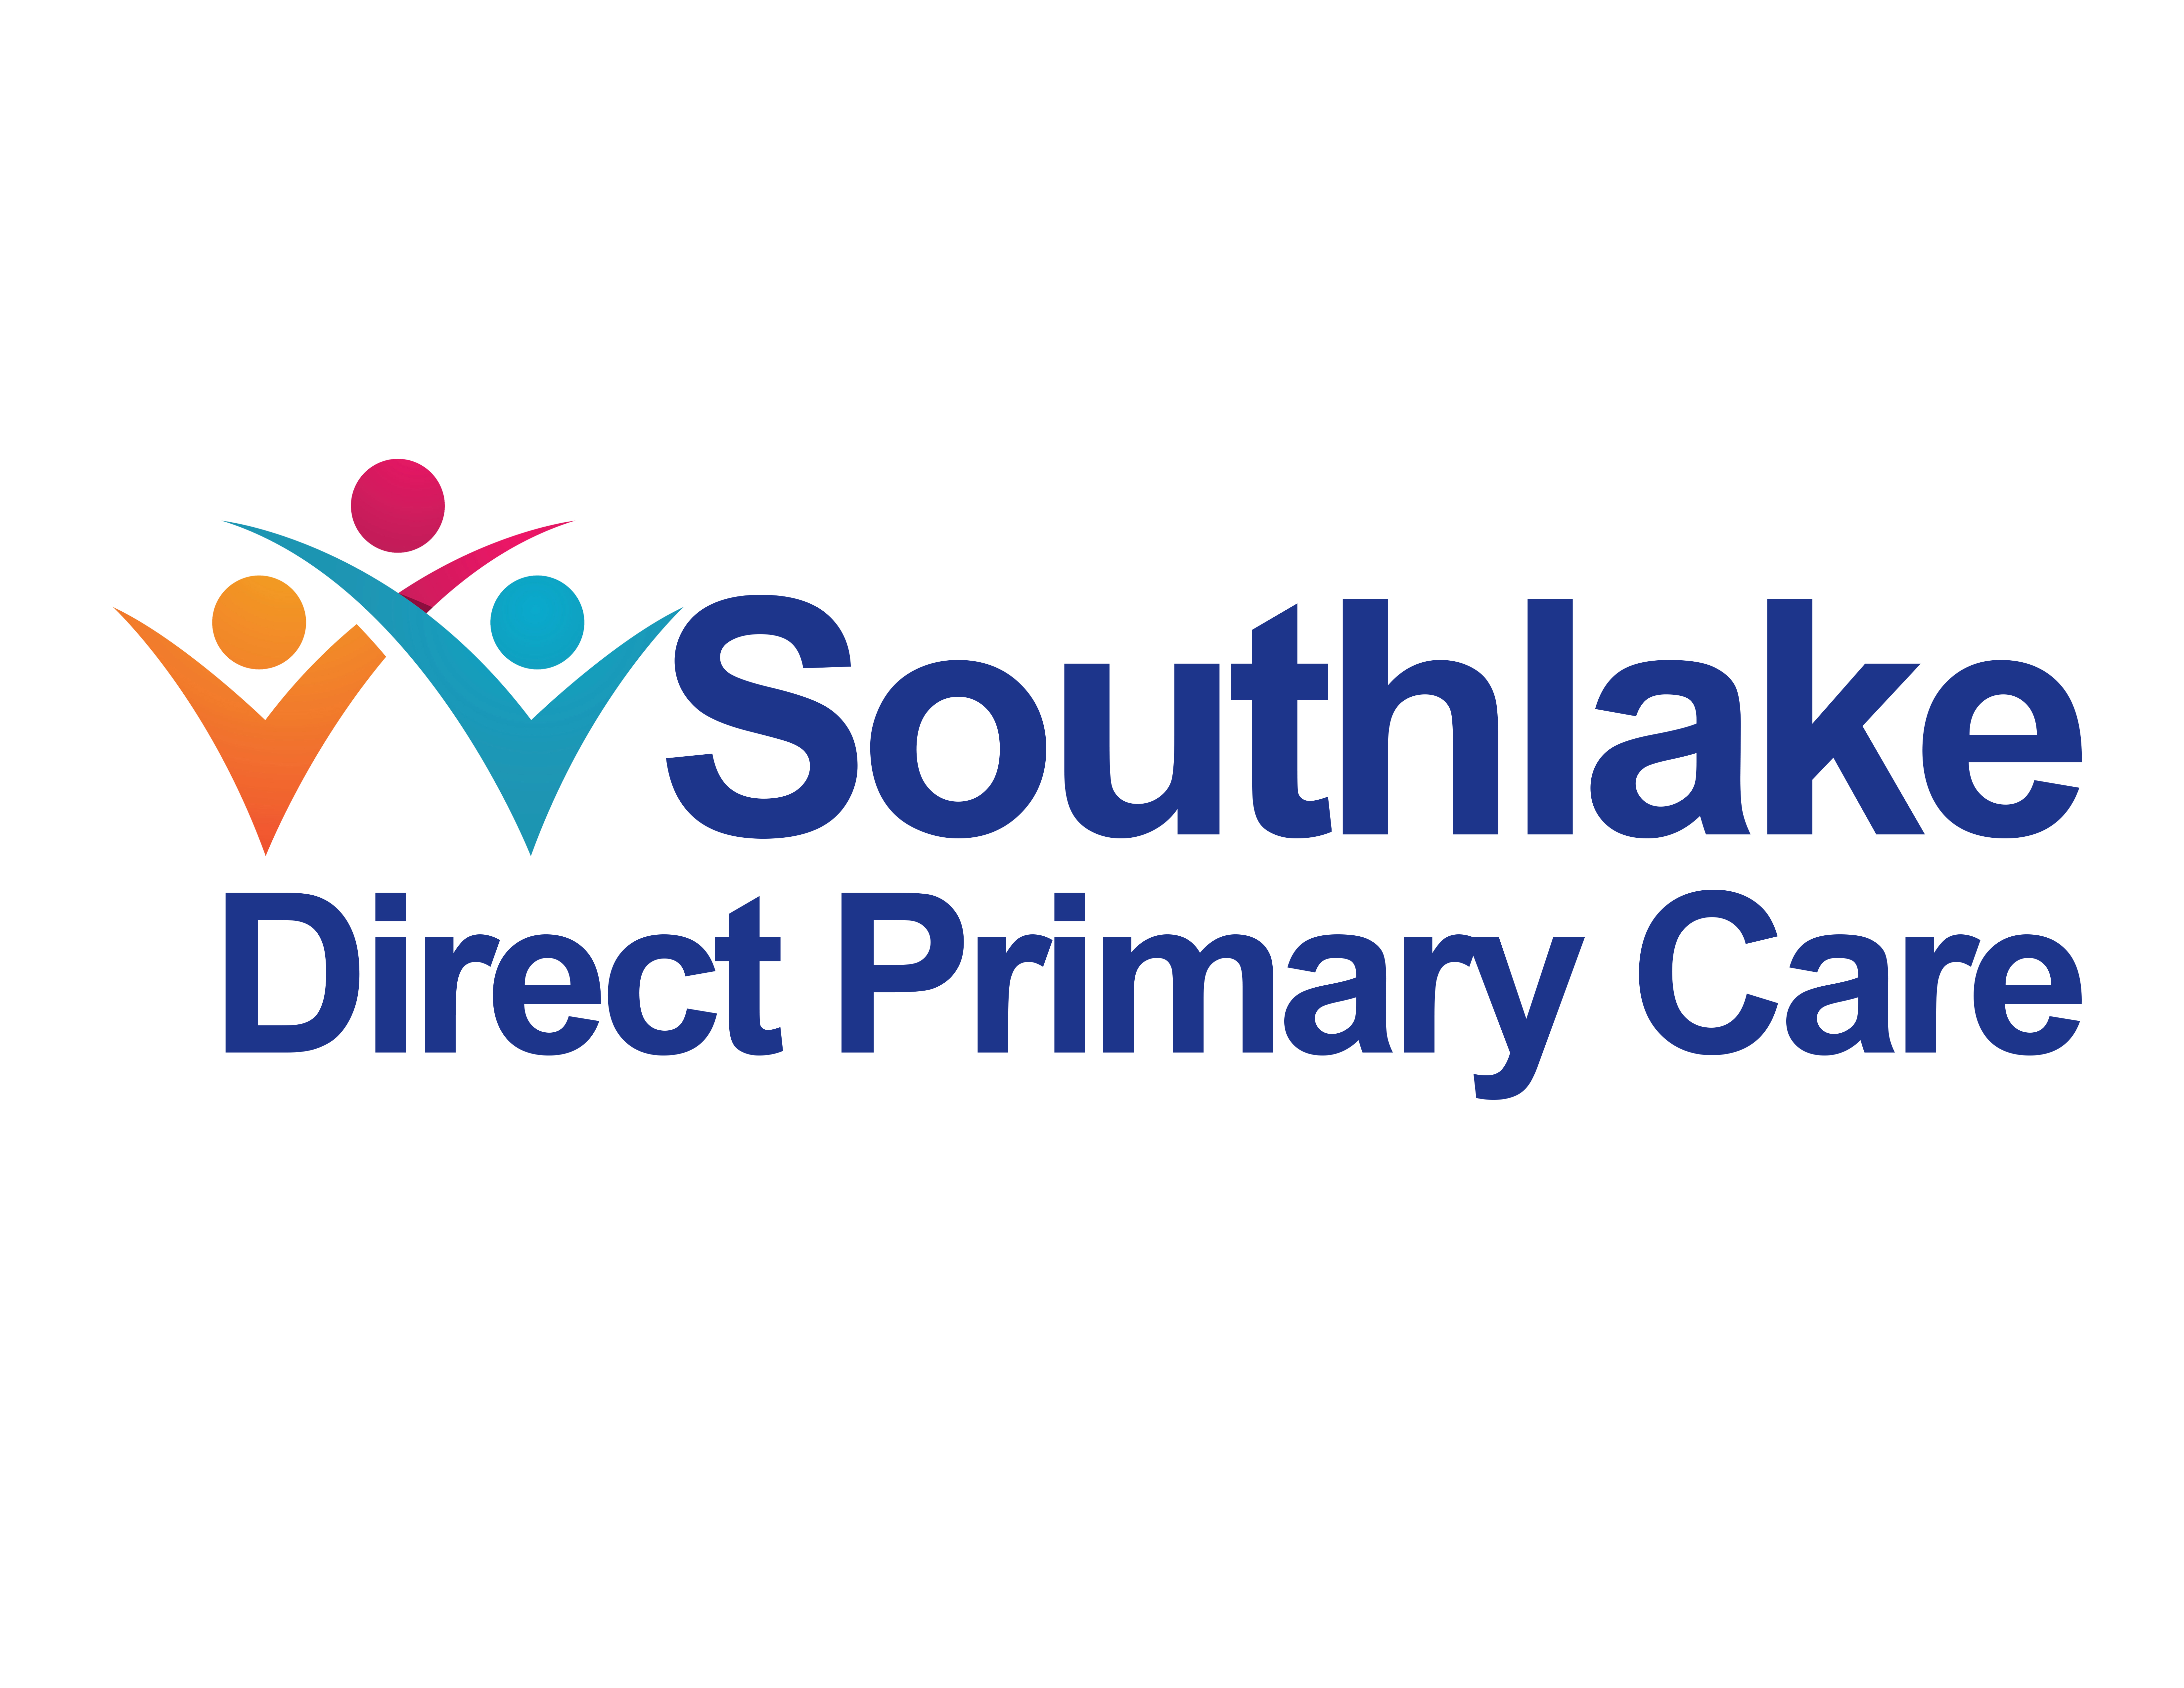 Southlake Direct Primary Care Logo